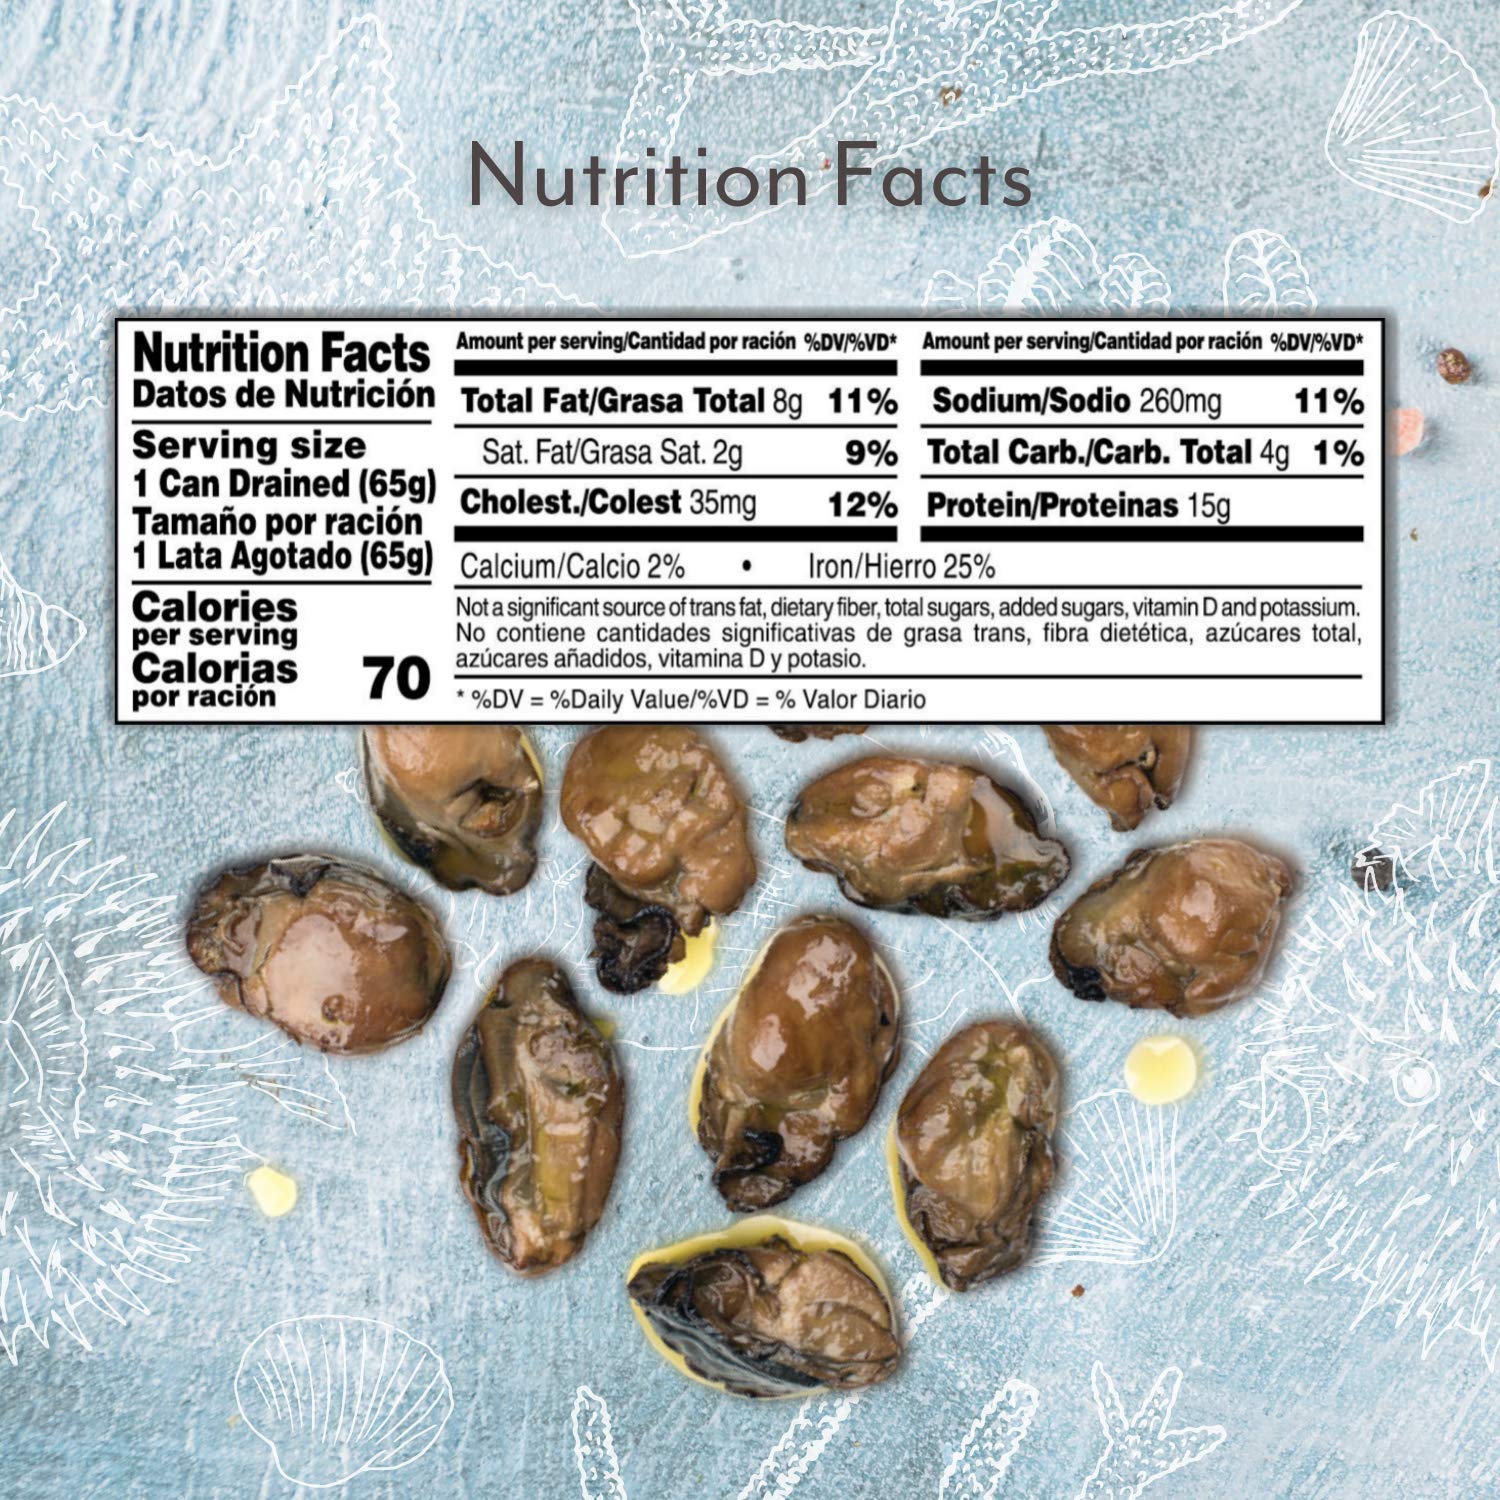 Roland Foods Premium Naturally Smoked Medium Oysters in Oil, Wild Caught, 3 Ounce, Pack of 1 : Oysters Seafood : Grocery & Gourmet Food